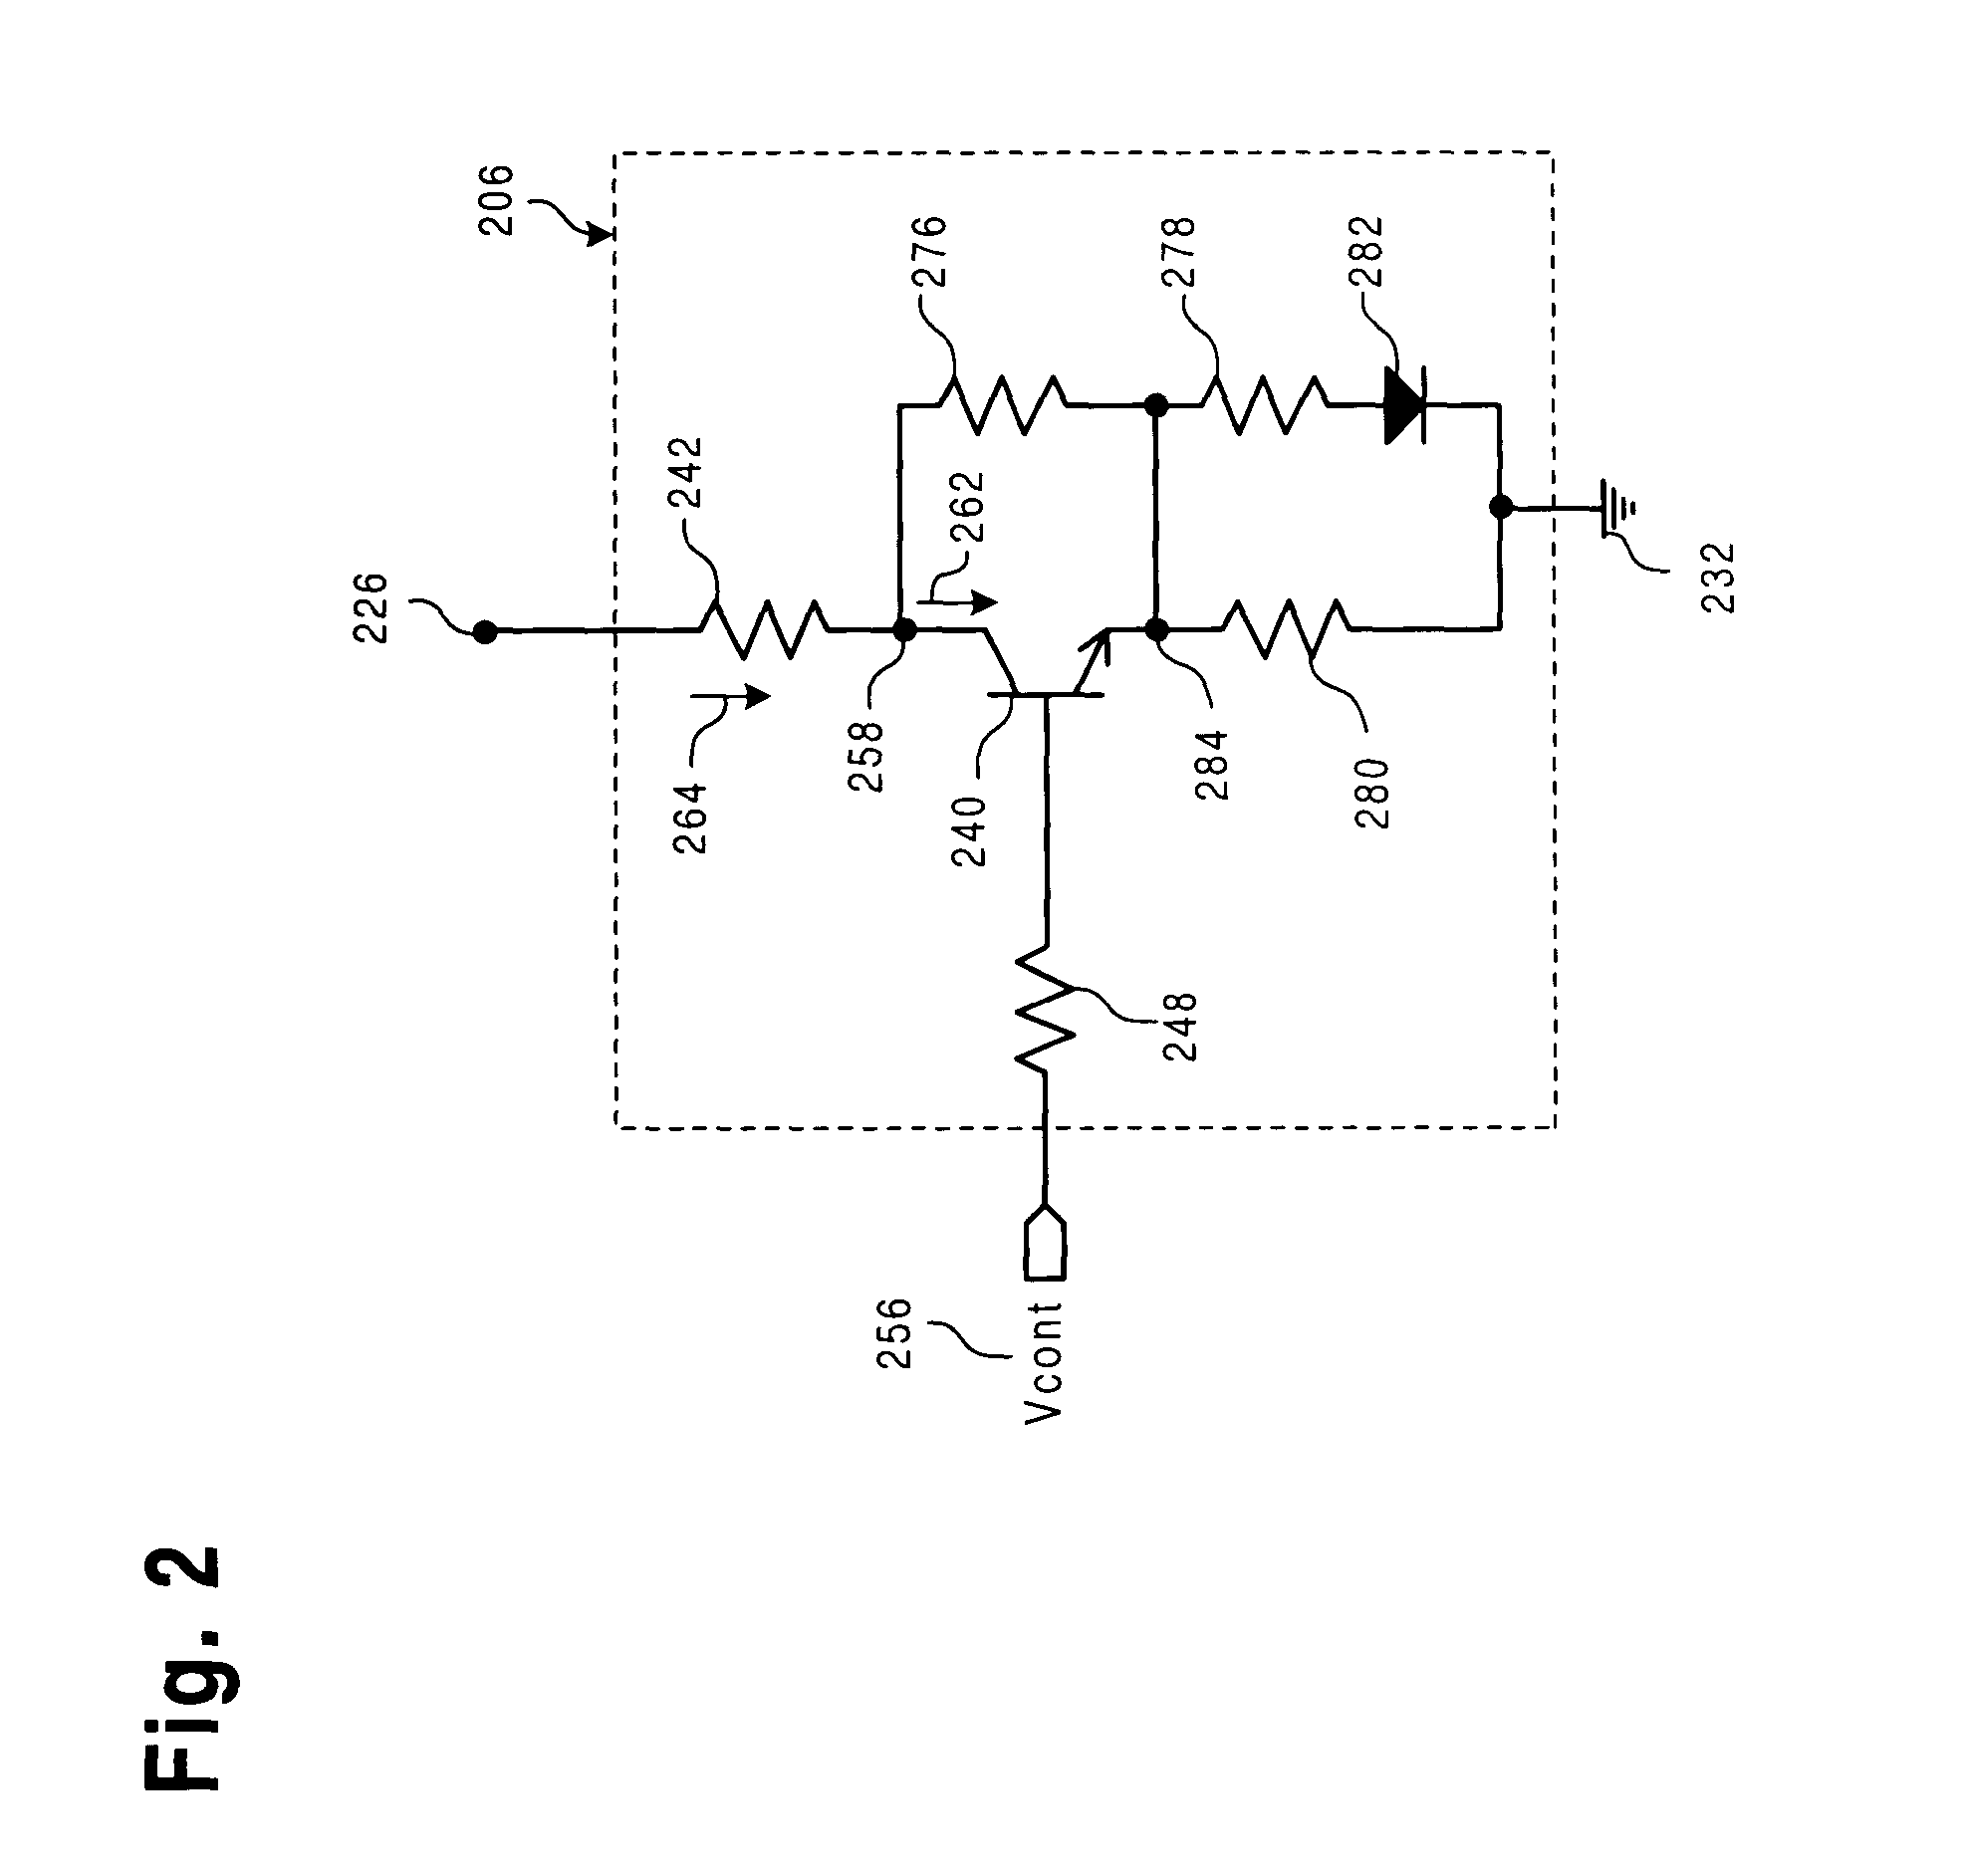 Quiescent current control circuit for high-power amplifiers